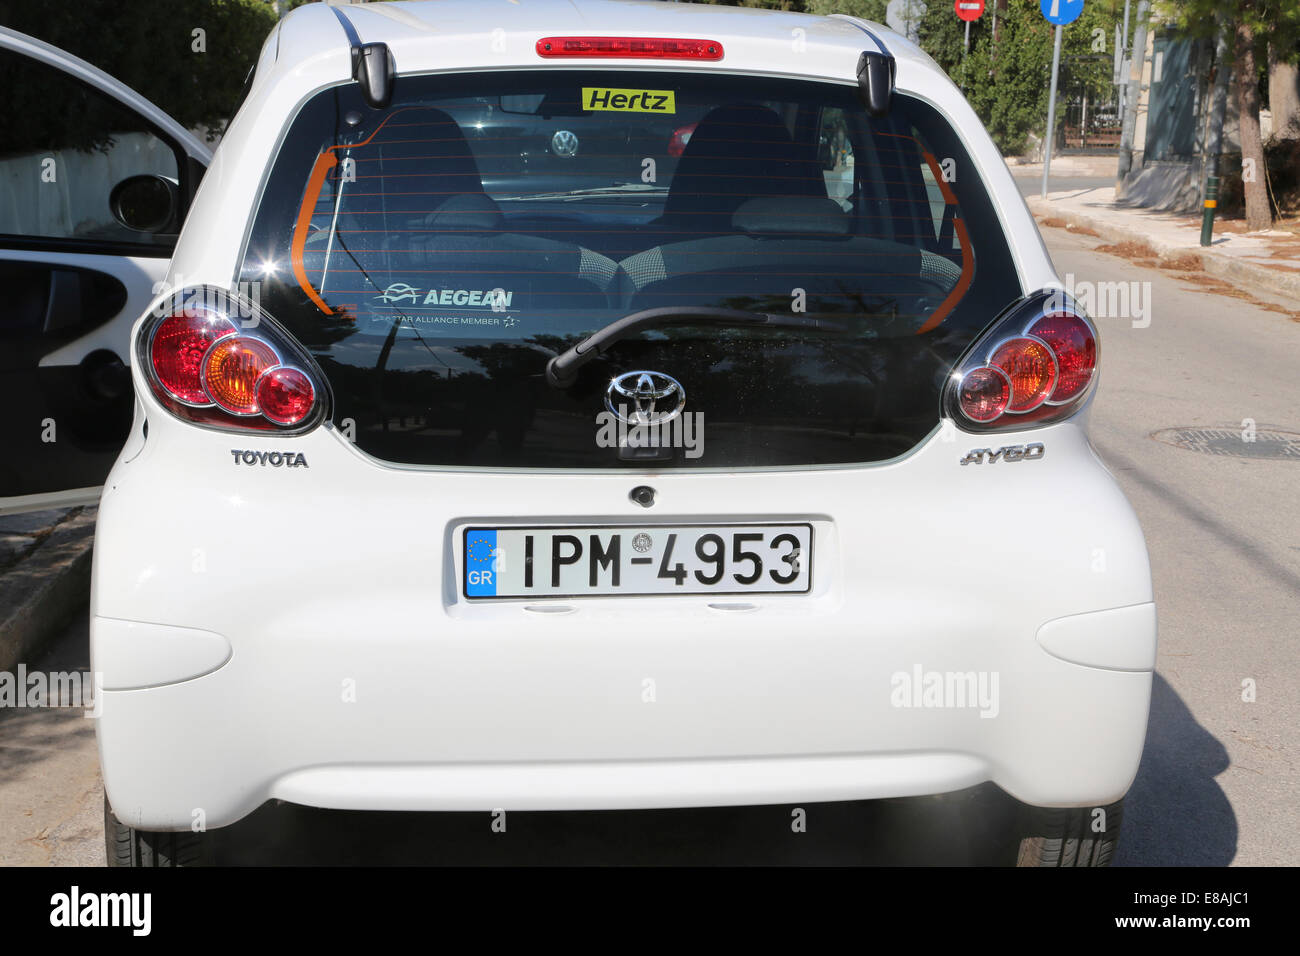 rent car in athens greece